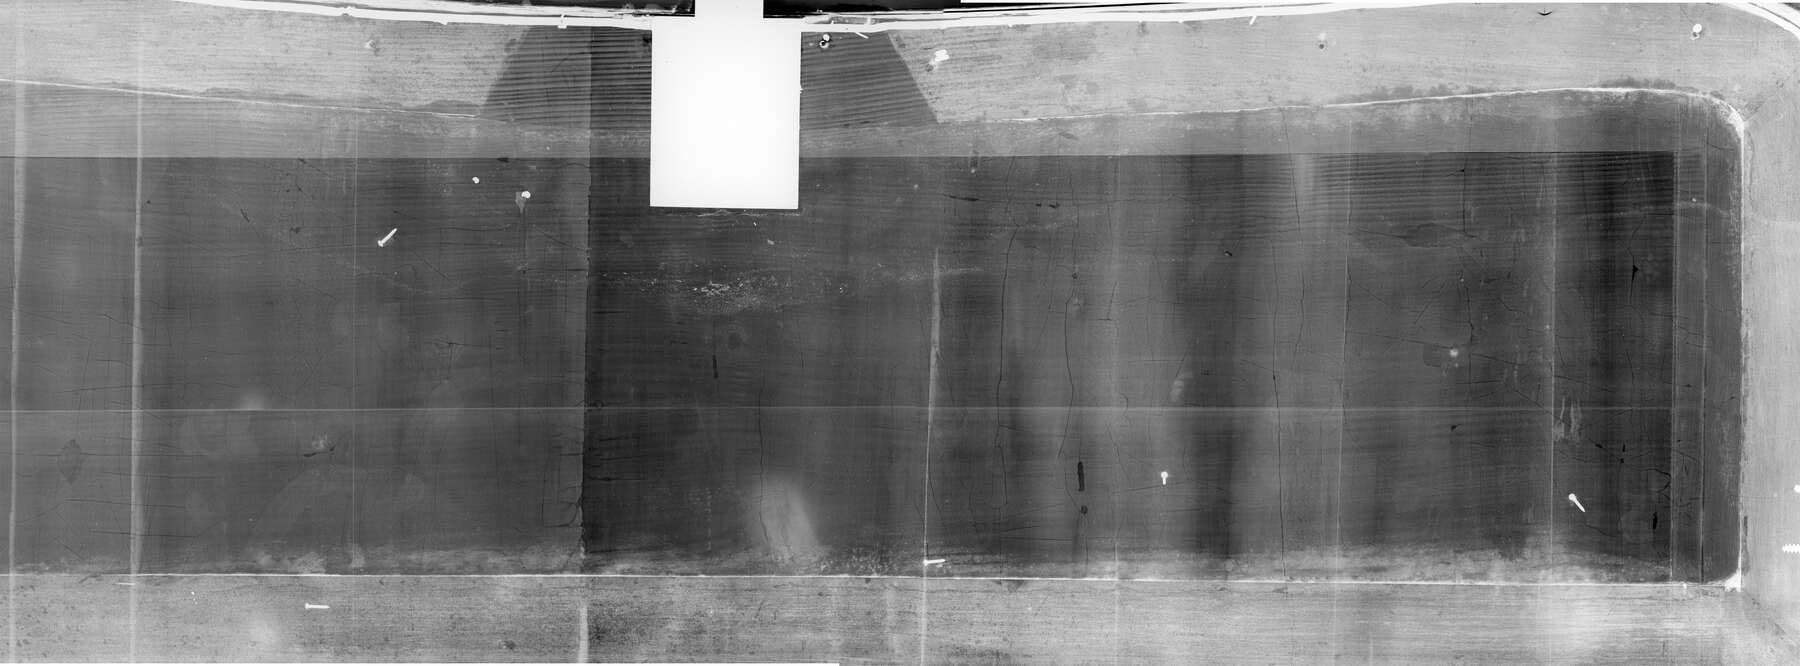 black-and-white composite x-ray of the pull-down writing surface, revealing the joinery holding multiple horizontal pieces of wood together